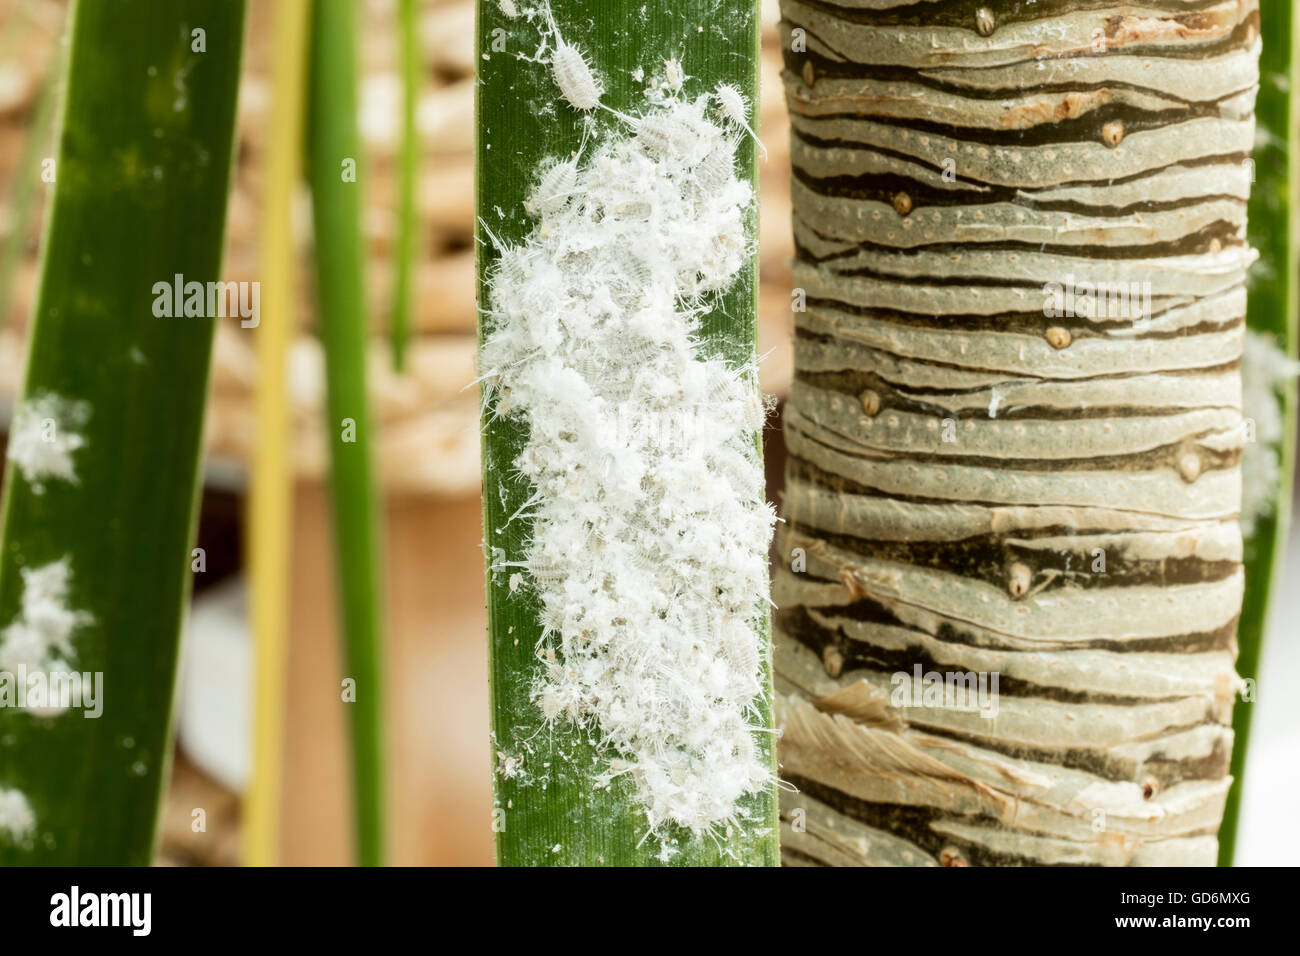 Mealybugs (long-tailed pseudococcus) on a palm tree leaf. Stock Photo